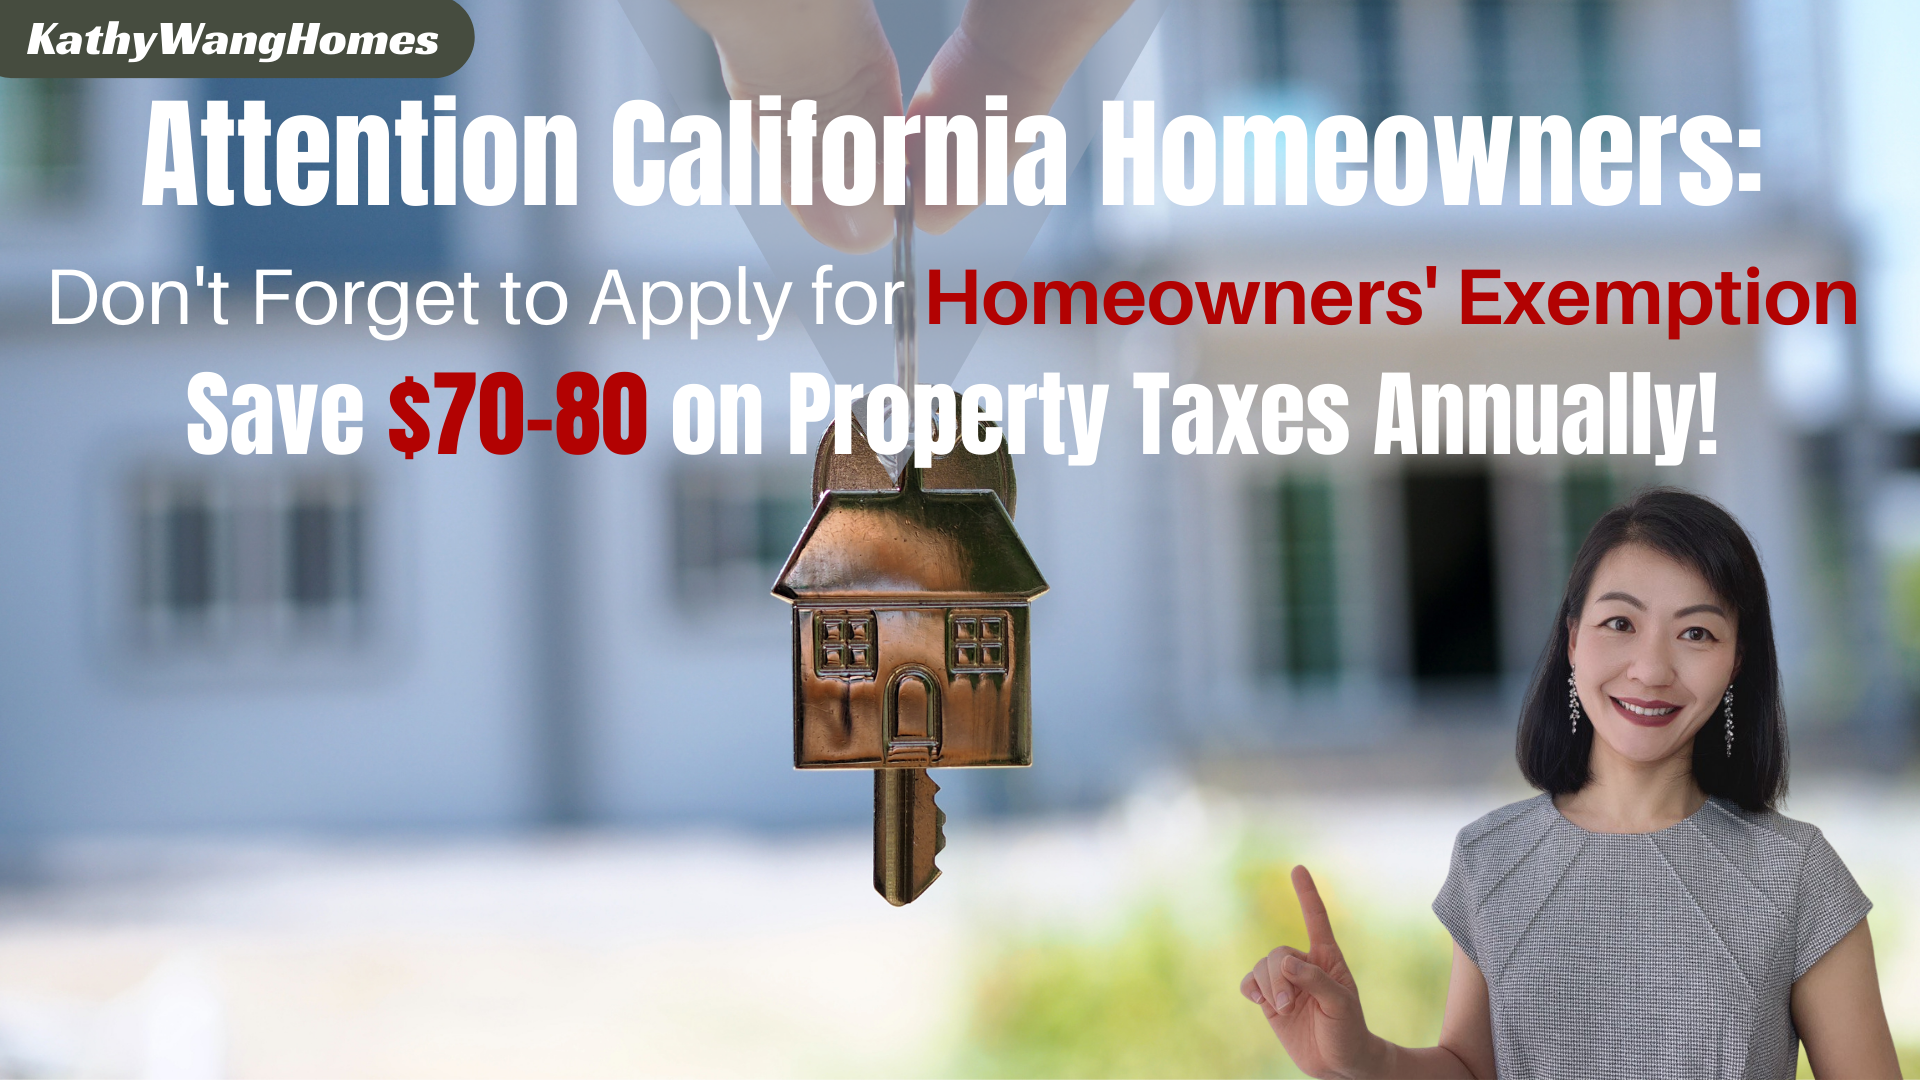 Attention California Homebuyers: Don't Forget to Apply for Homeowners' Exemption - Save $70-80 on Property Taxes Annually!